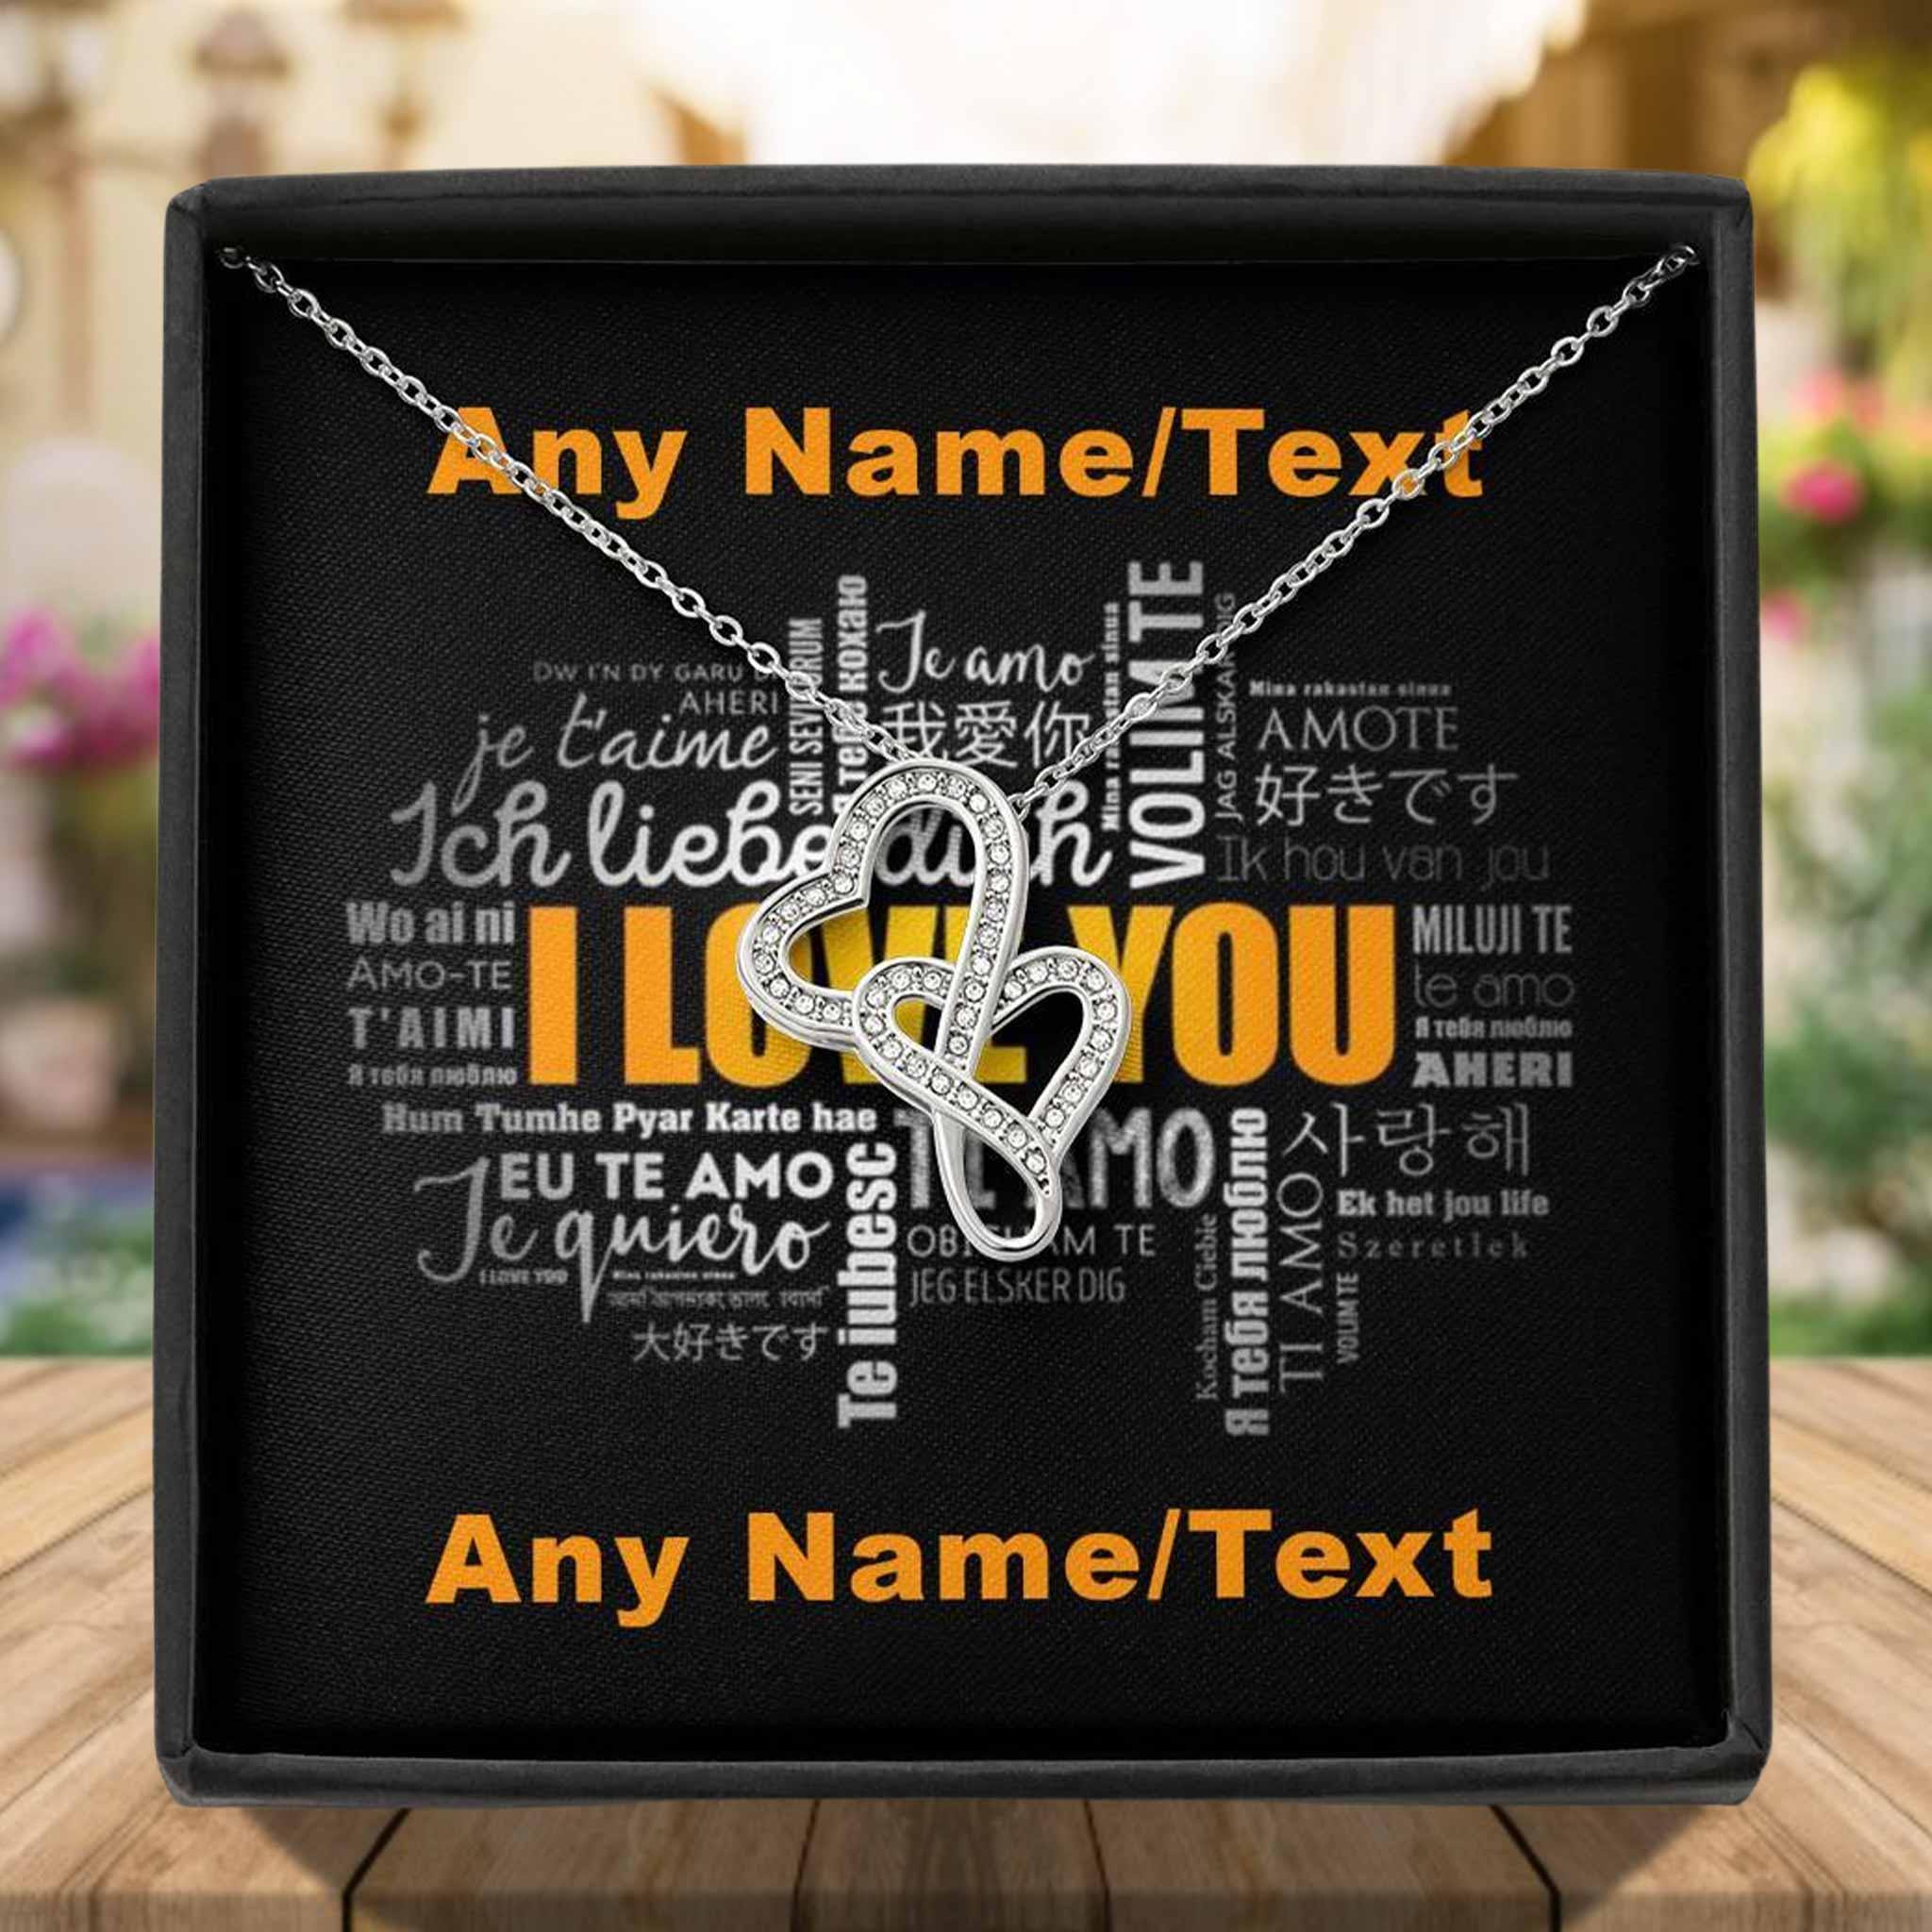 Double Intertwined Hearts Necklace With Personalized I Love You In Multiple Languages v1 Insert CardCustomly Gifts